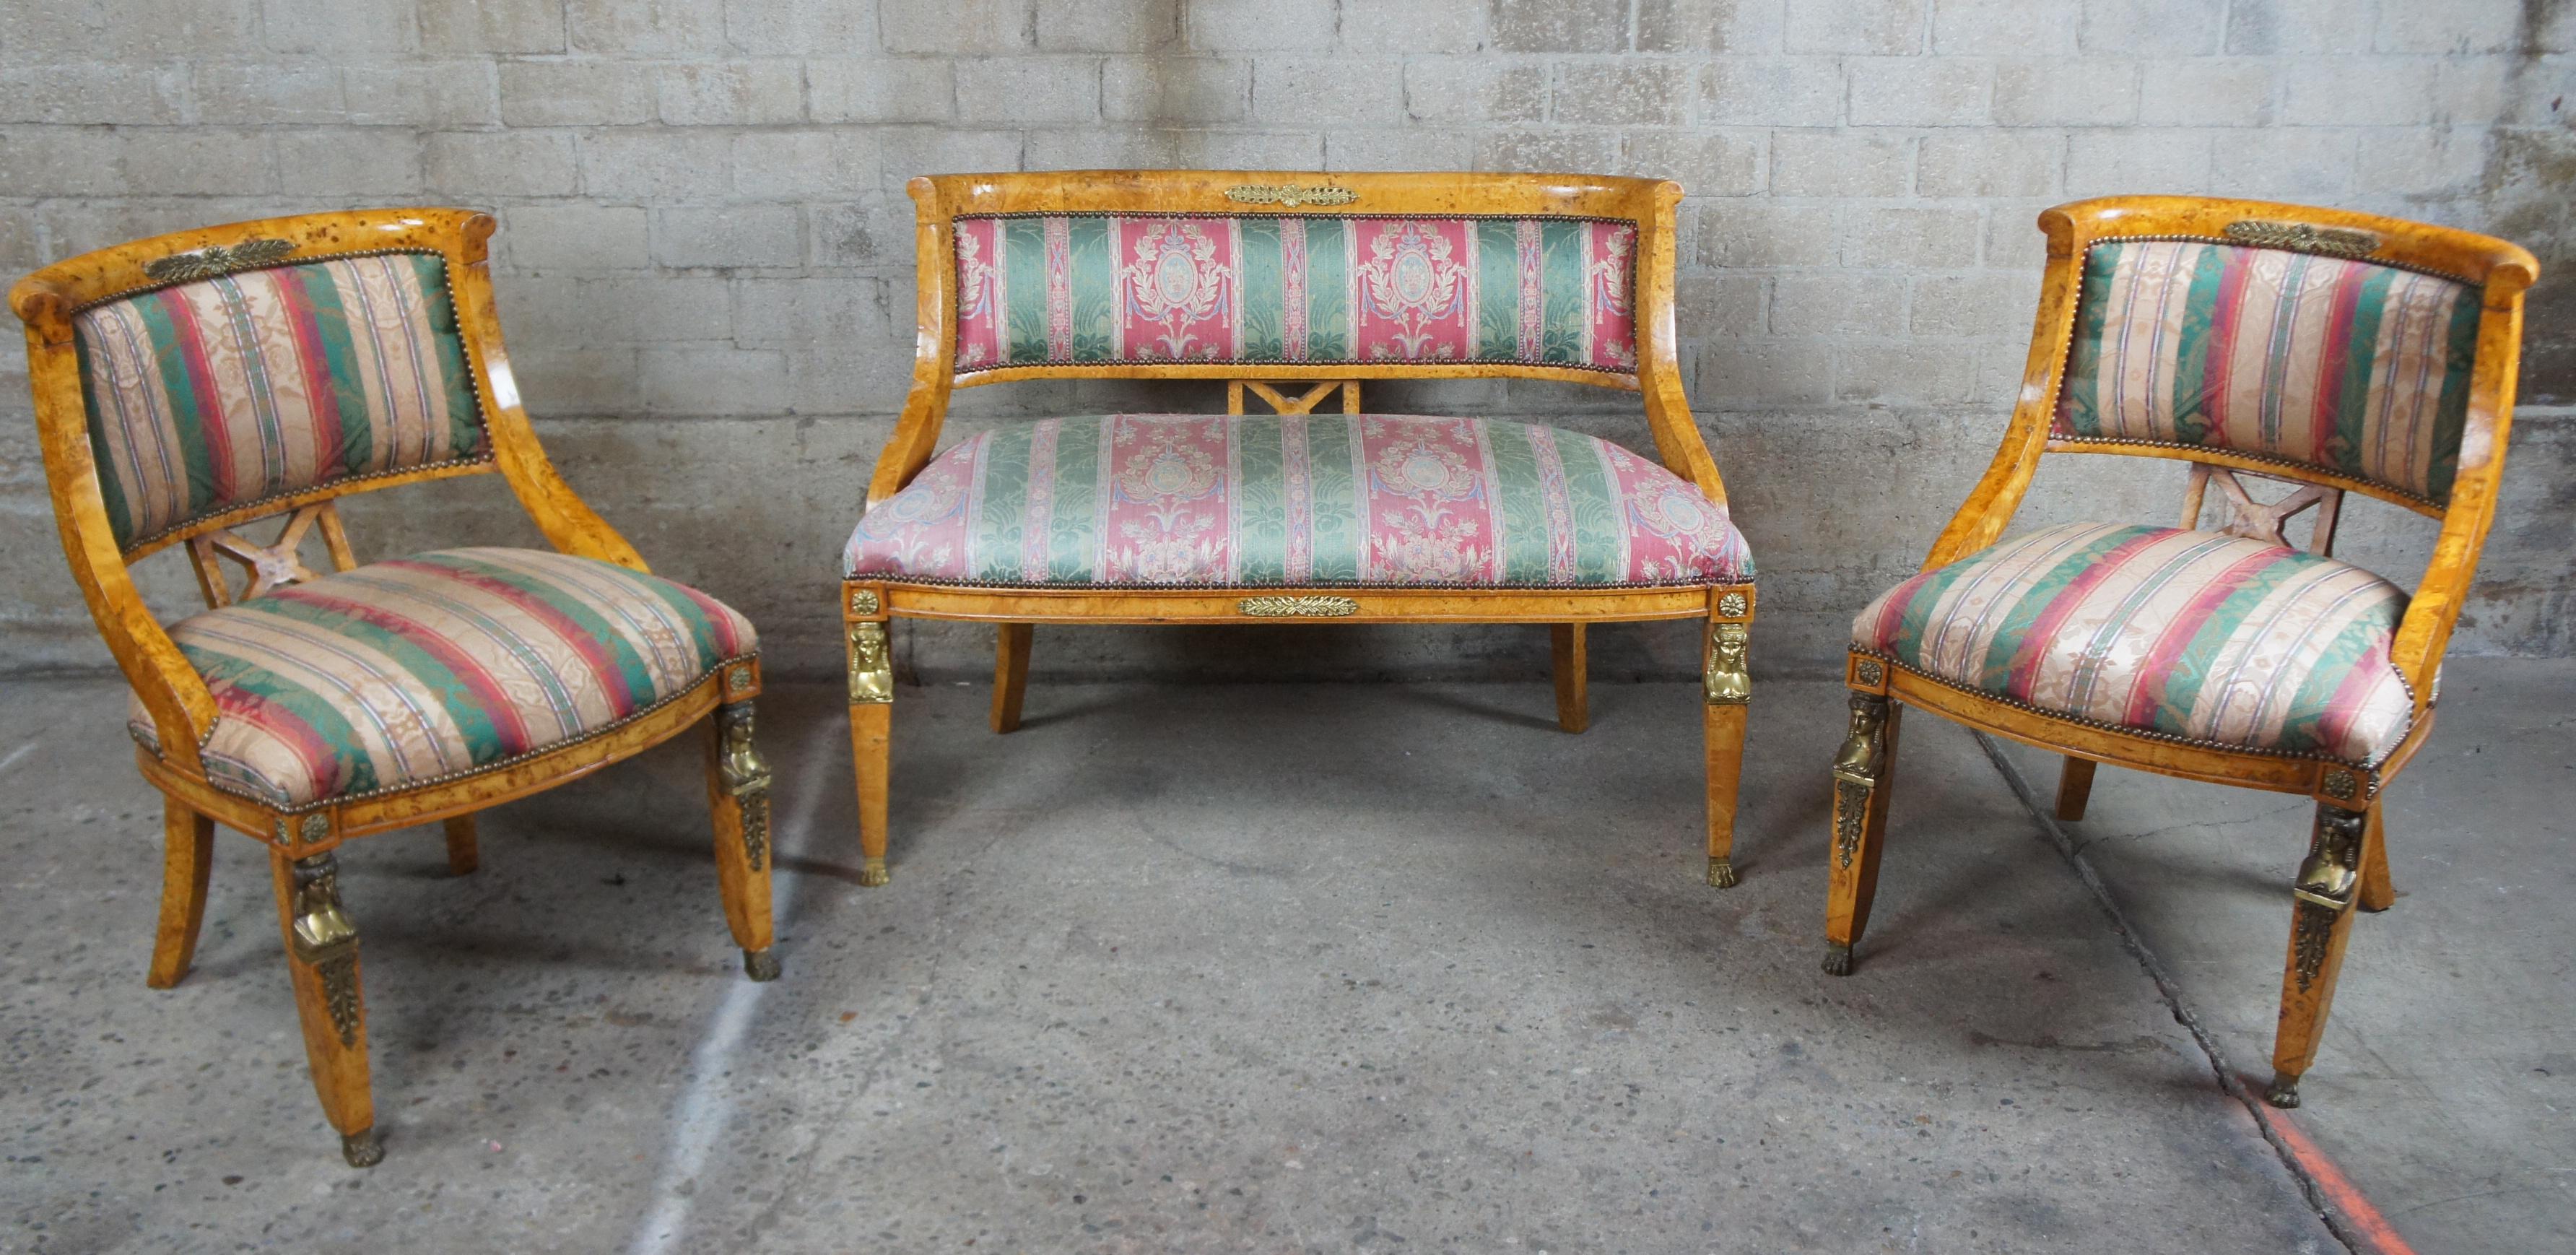 Monumental early 20th century 5-piece parlor set. A neoclassical and Egyptian revival inspired design. Features a curved rail with unique X-back between contoured arms leading to regal upholstery. The chairs are supported by square tapered front